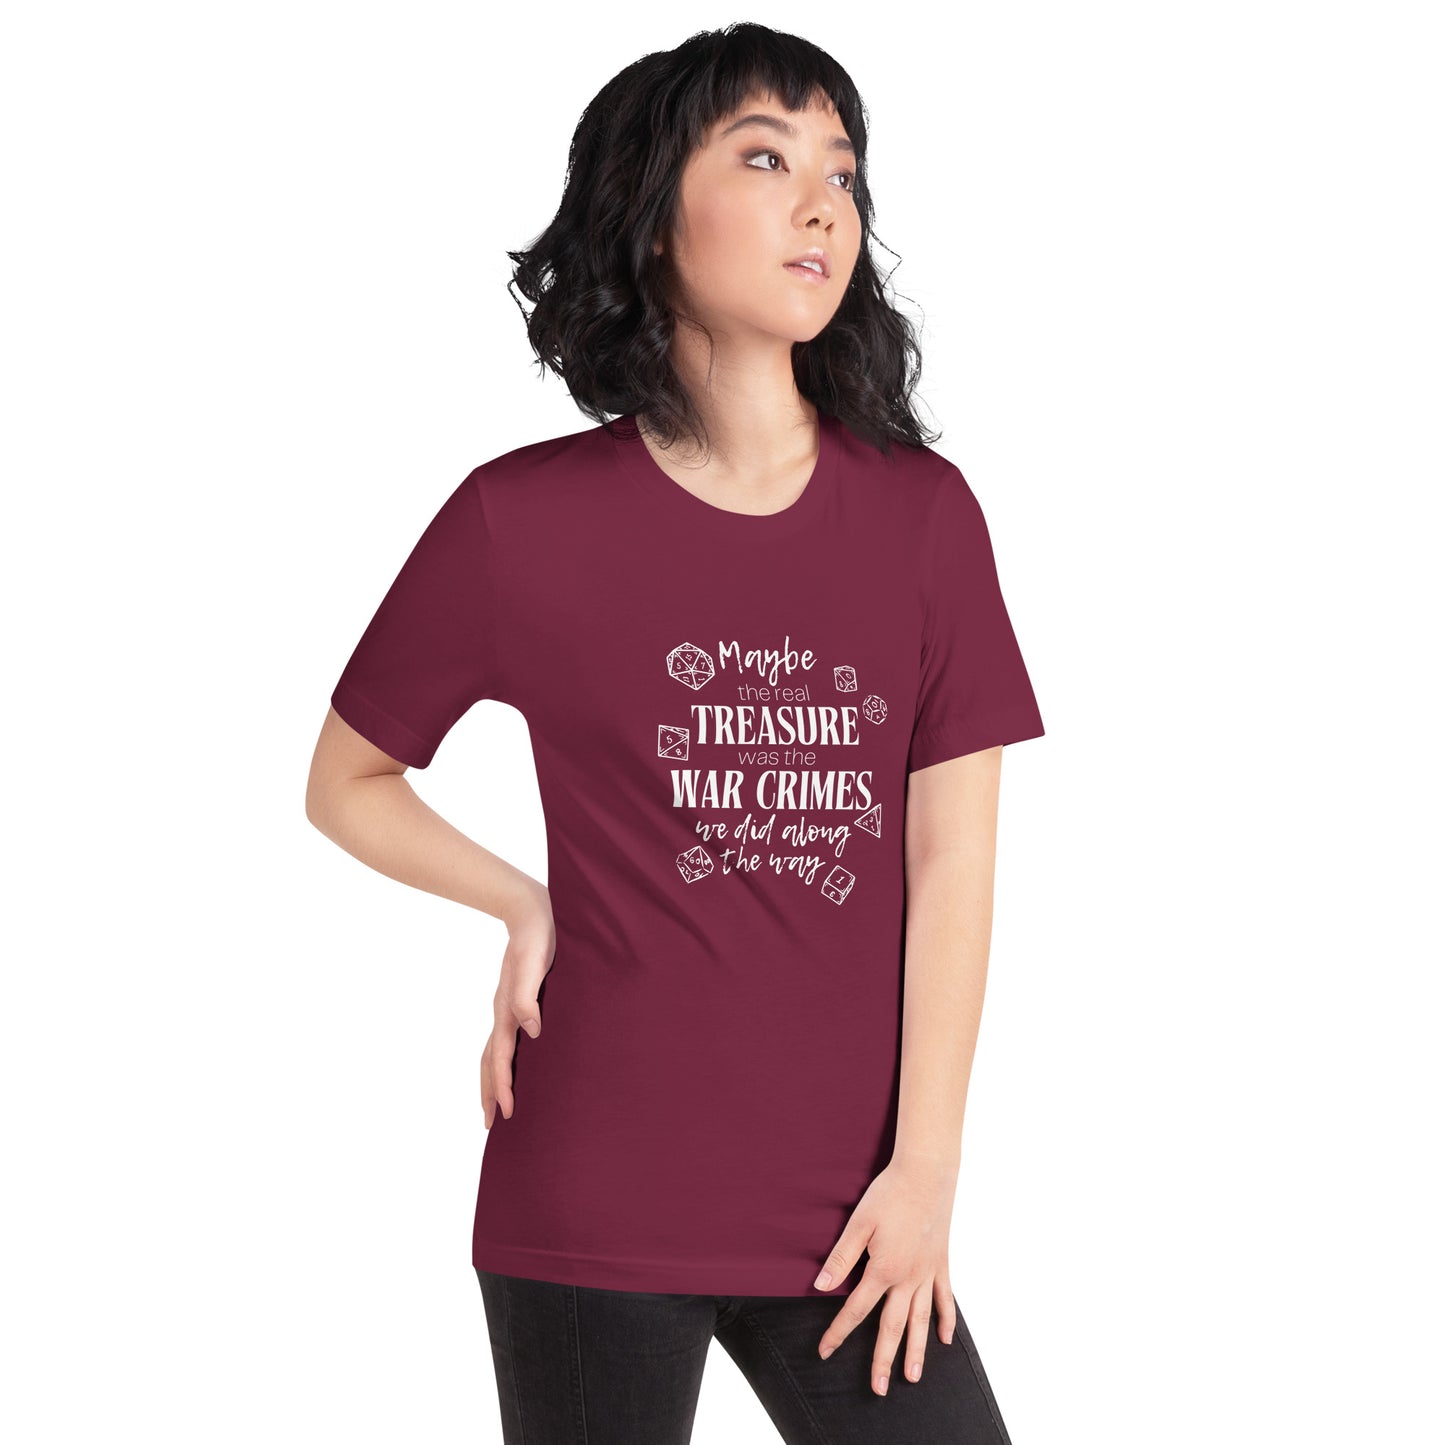 Maybe the real treasure - War Crimes D&D Unisex t-shirt